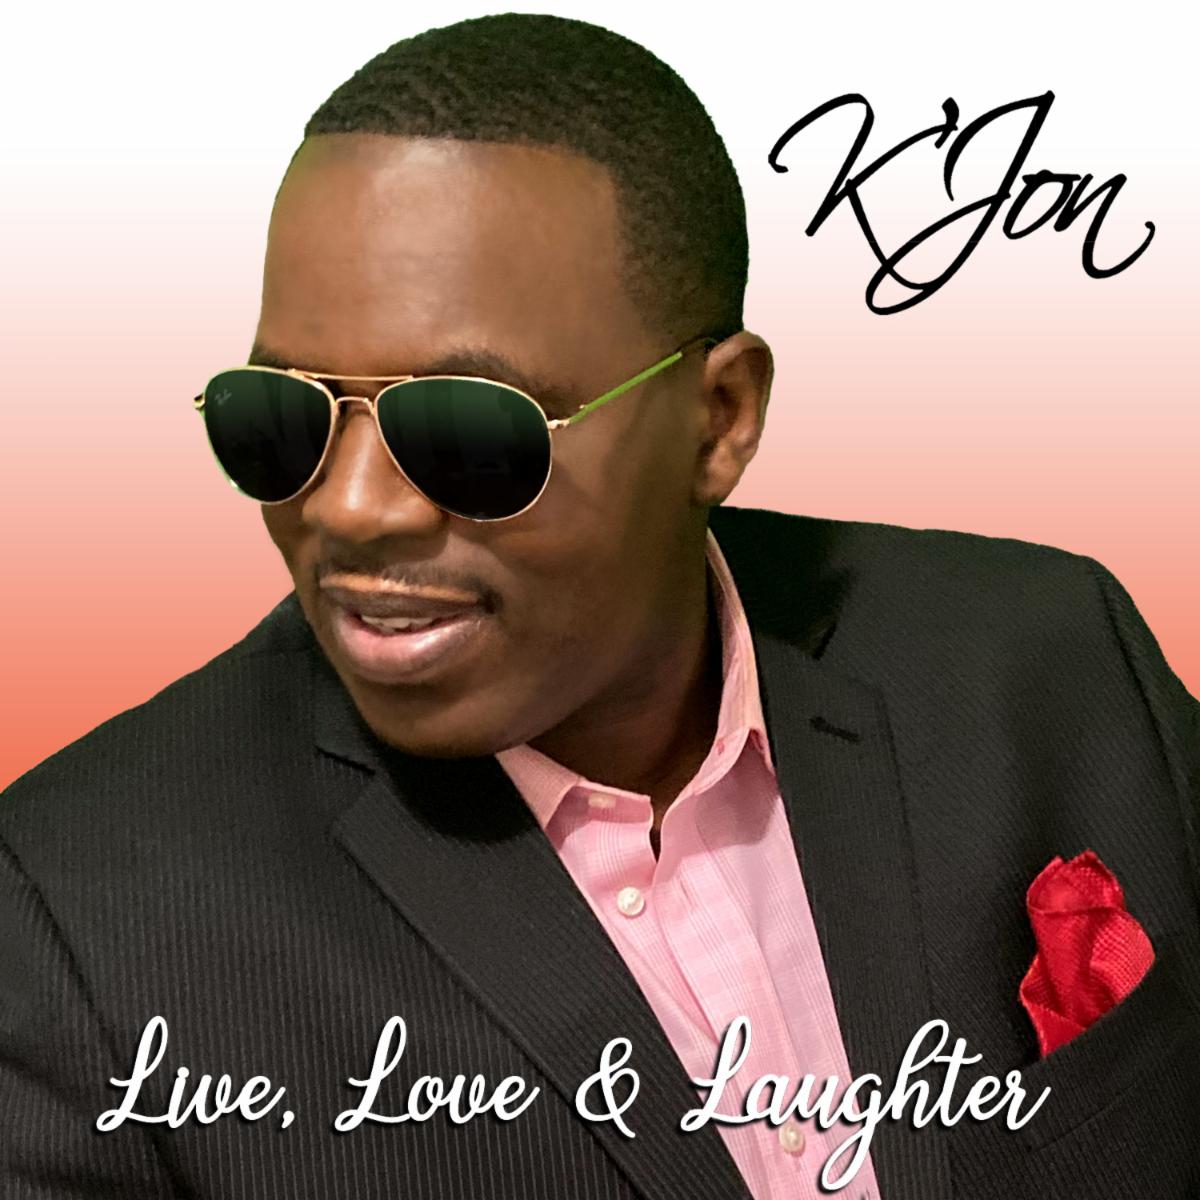 K’Jon Returns With the New Single “Live, Love & Laughter”